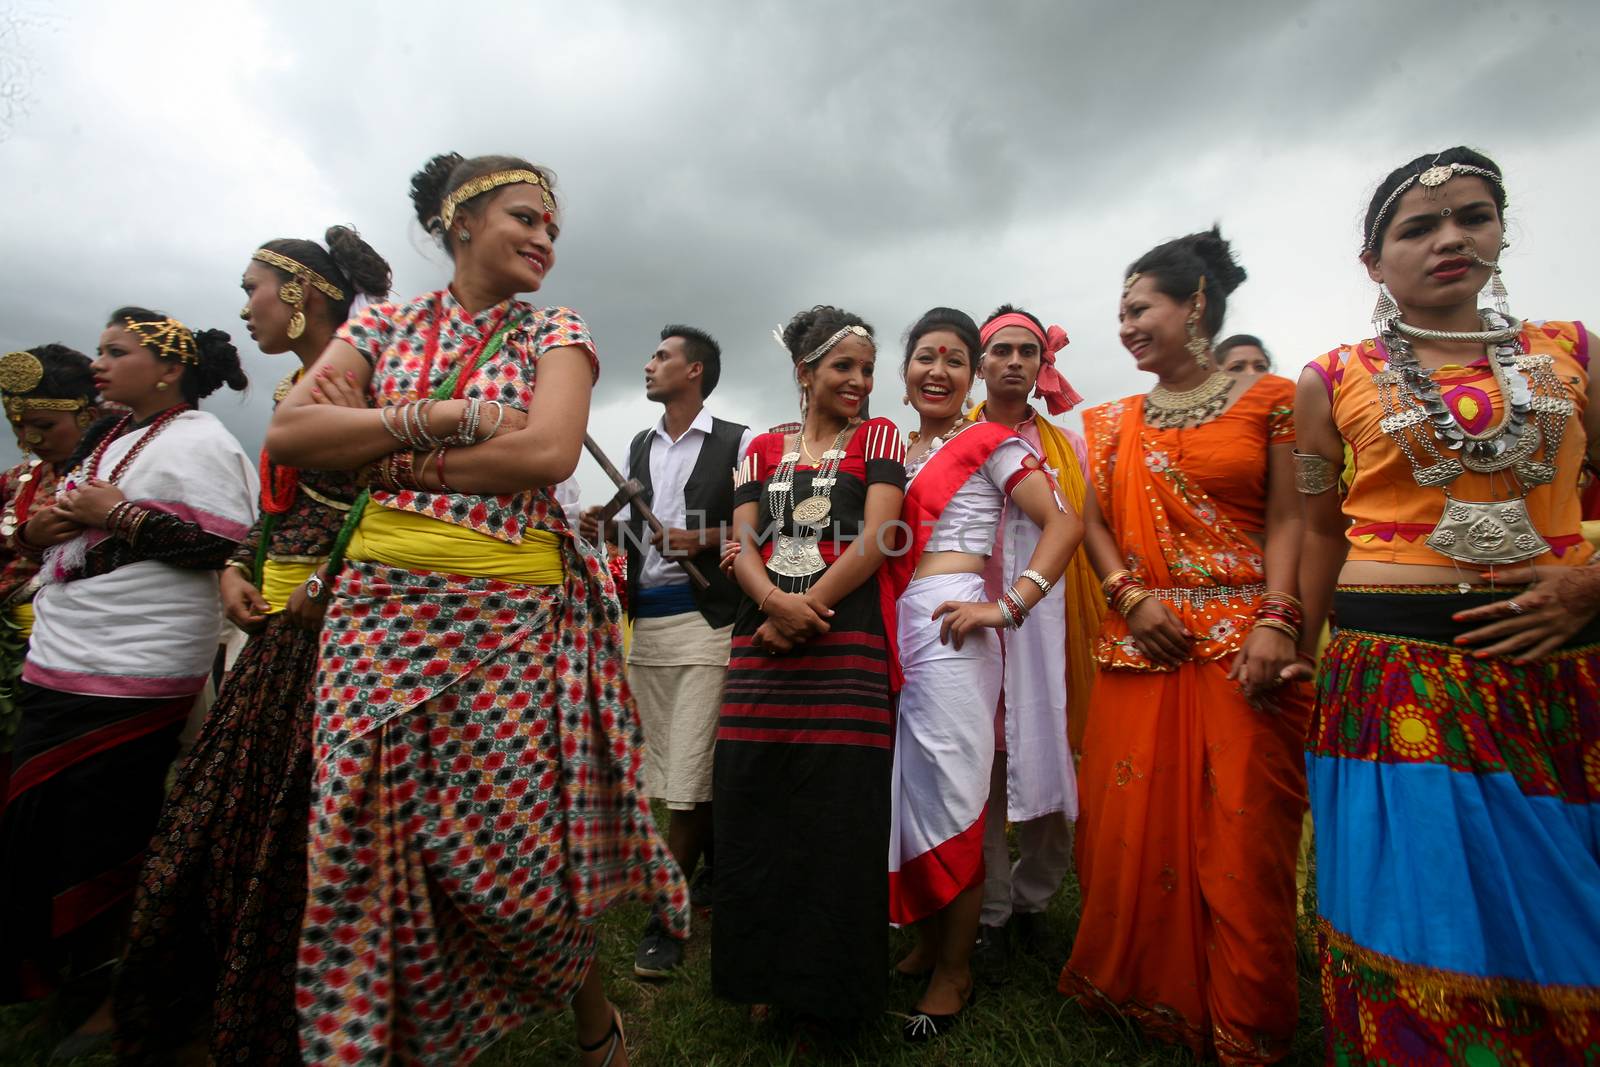 NEPAL, Kathmandu: Women attend celebrations in Kathmandu, Nepal on September 21, 2015, one day after the government unveiled the country's first democratic constitution in a historic step. Out of the 598 members of the Constituent Assembly, 507 voted for the new constitution, 25 voted against, and 66 abstained in a vote on September 16, 2015. The event was marked with fireworks and festivities, but also with protests organized by parties of the Tharu and Madhesi ethnic communities.Photos taken by Newzulu contributor Dinesh Shrestha show the Nepalese people donning traditional garb and celebrating with folk music and dancing.